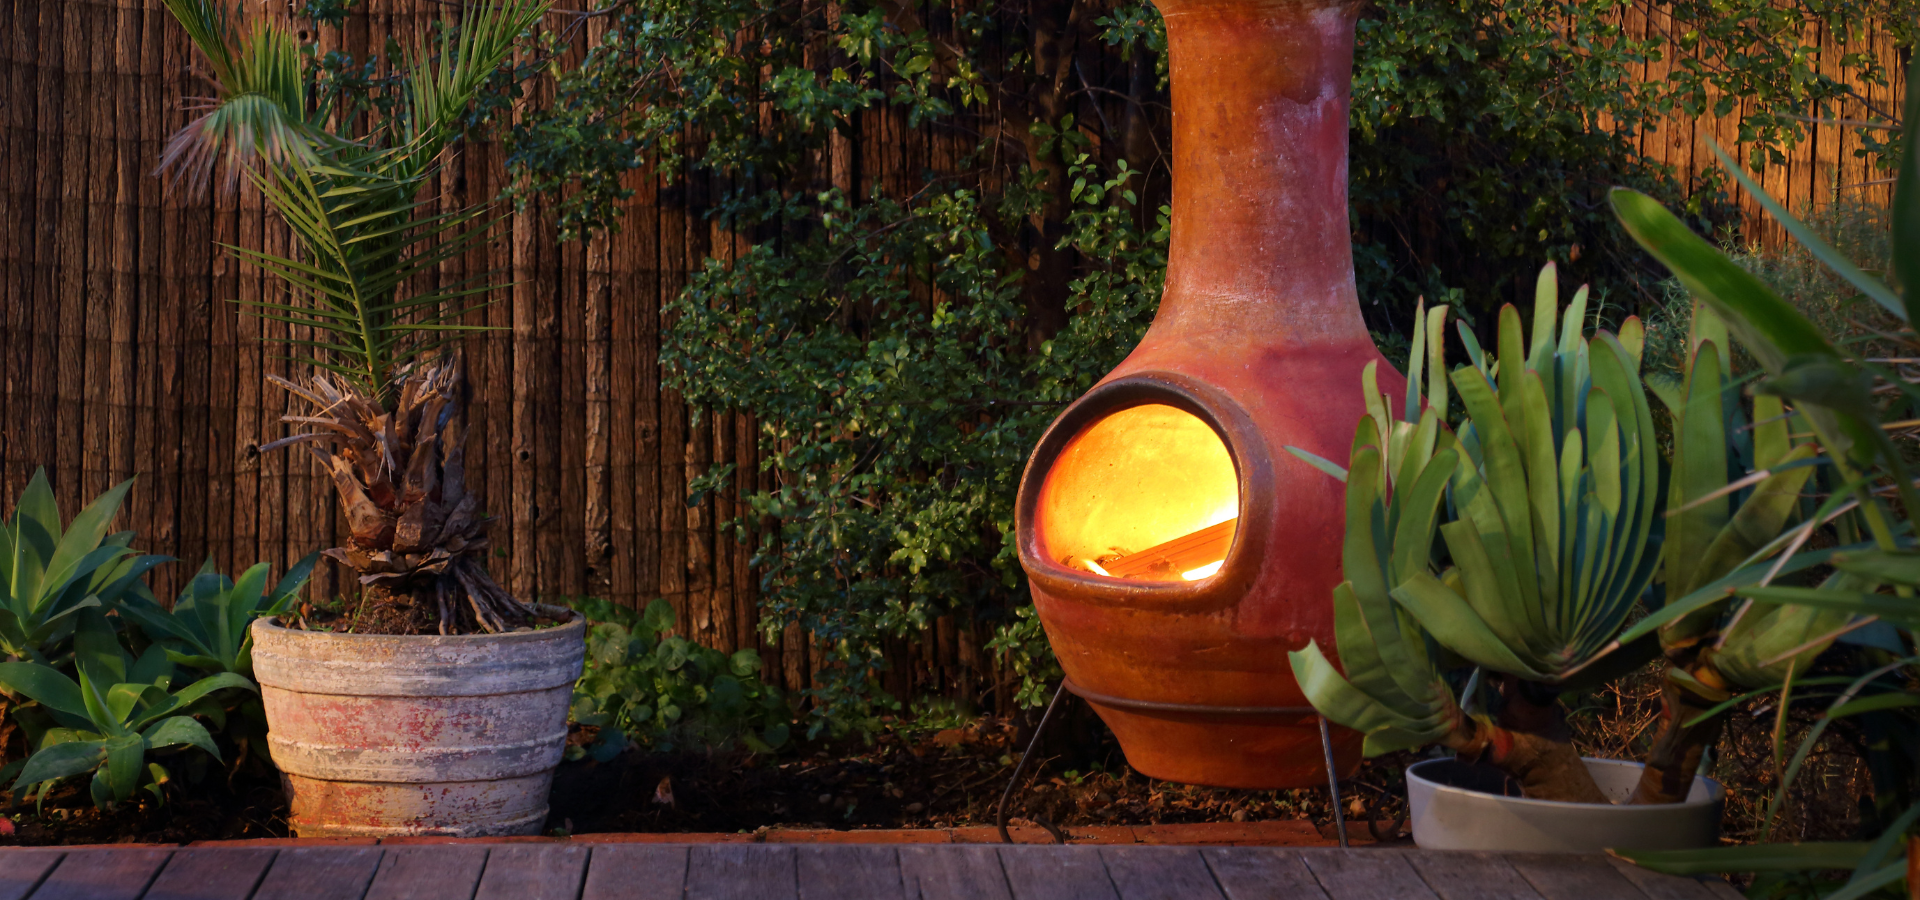 A lit clay chiminea in a garden